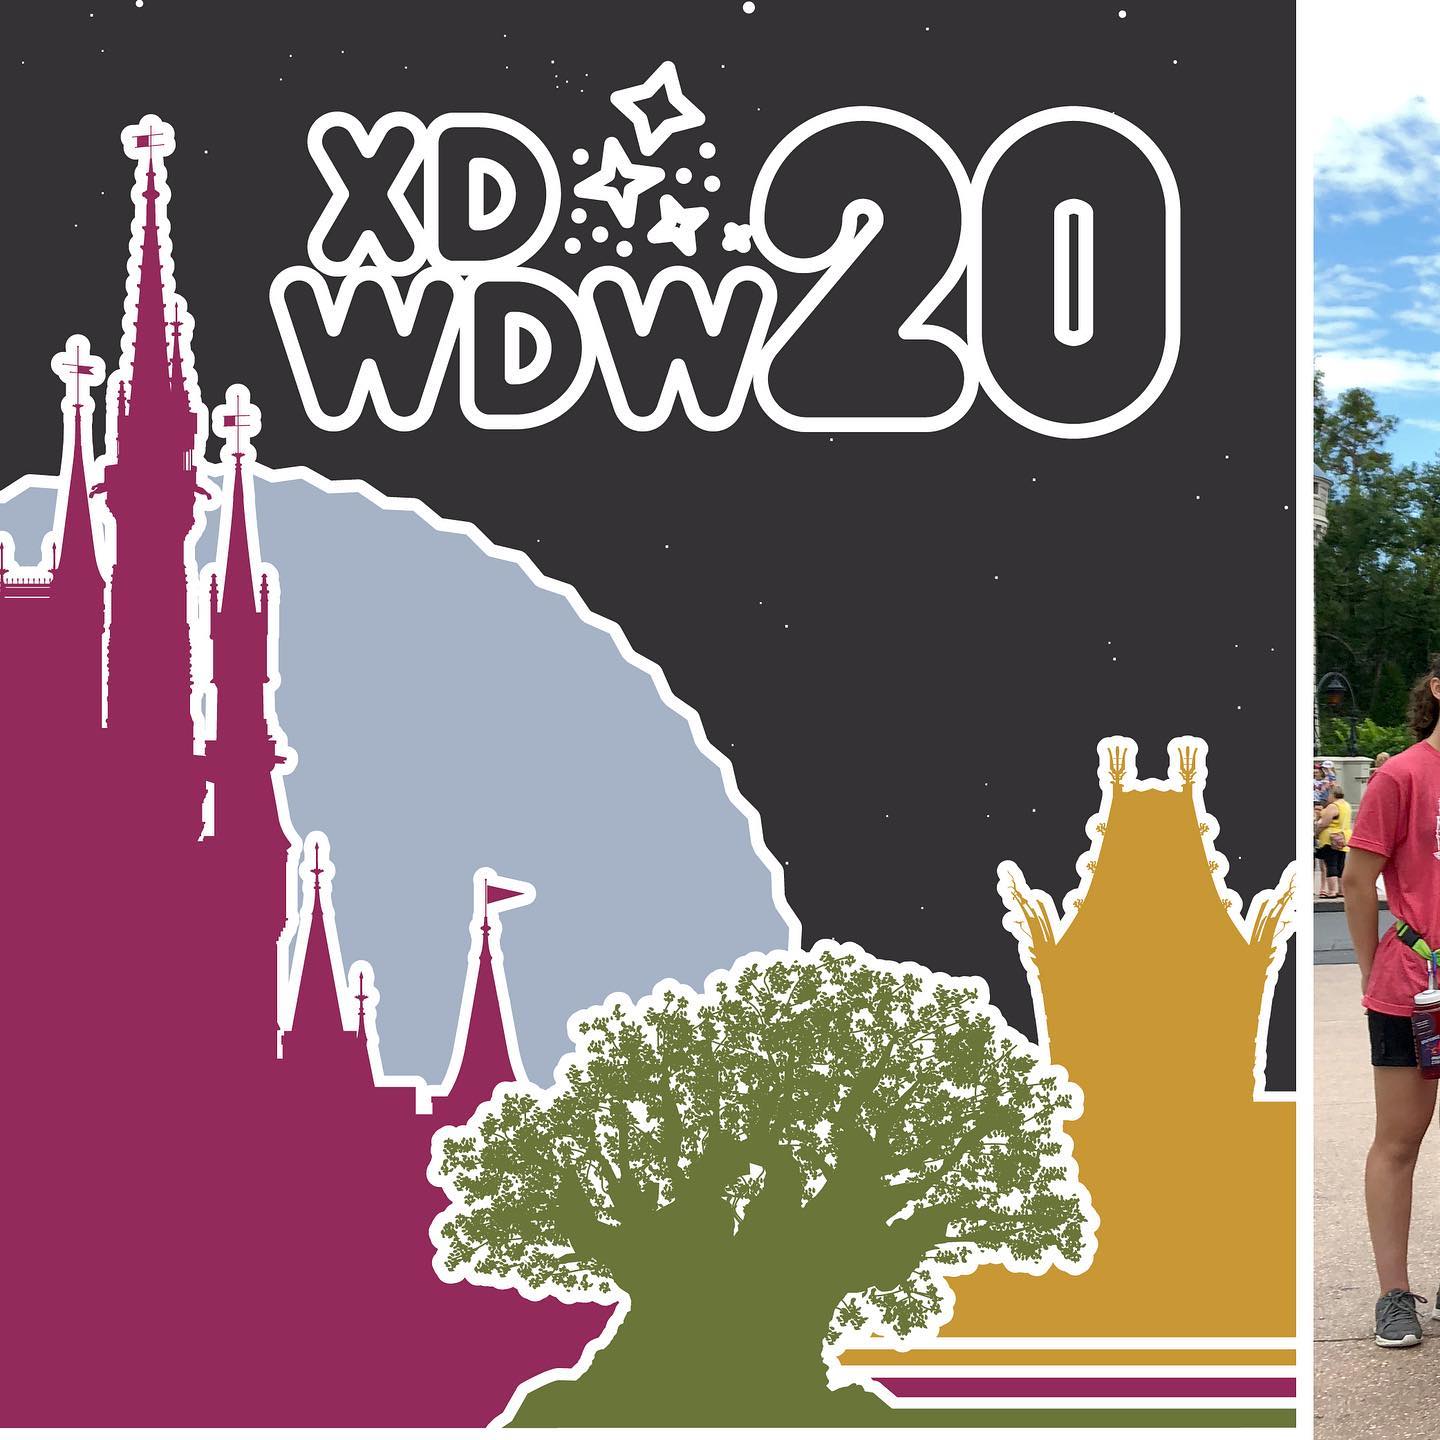 Study experience design at Walt Disney World with me this summer!
.
3 weeks online, Jun. 4-10 in Orlando  Deadline Mar. 1  http://dmoh.org/xdwdw2020
.
Learn how Disney designs the magic and how to research and design amazing user experiences!